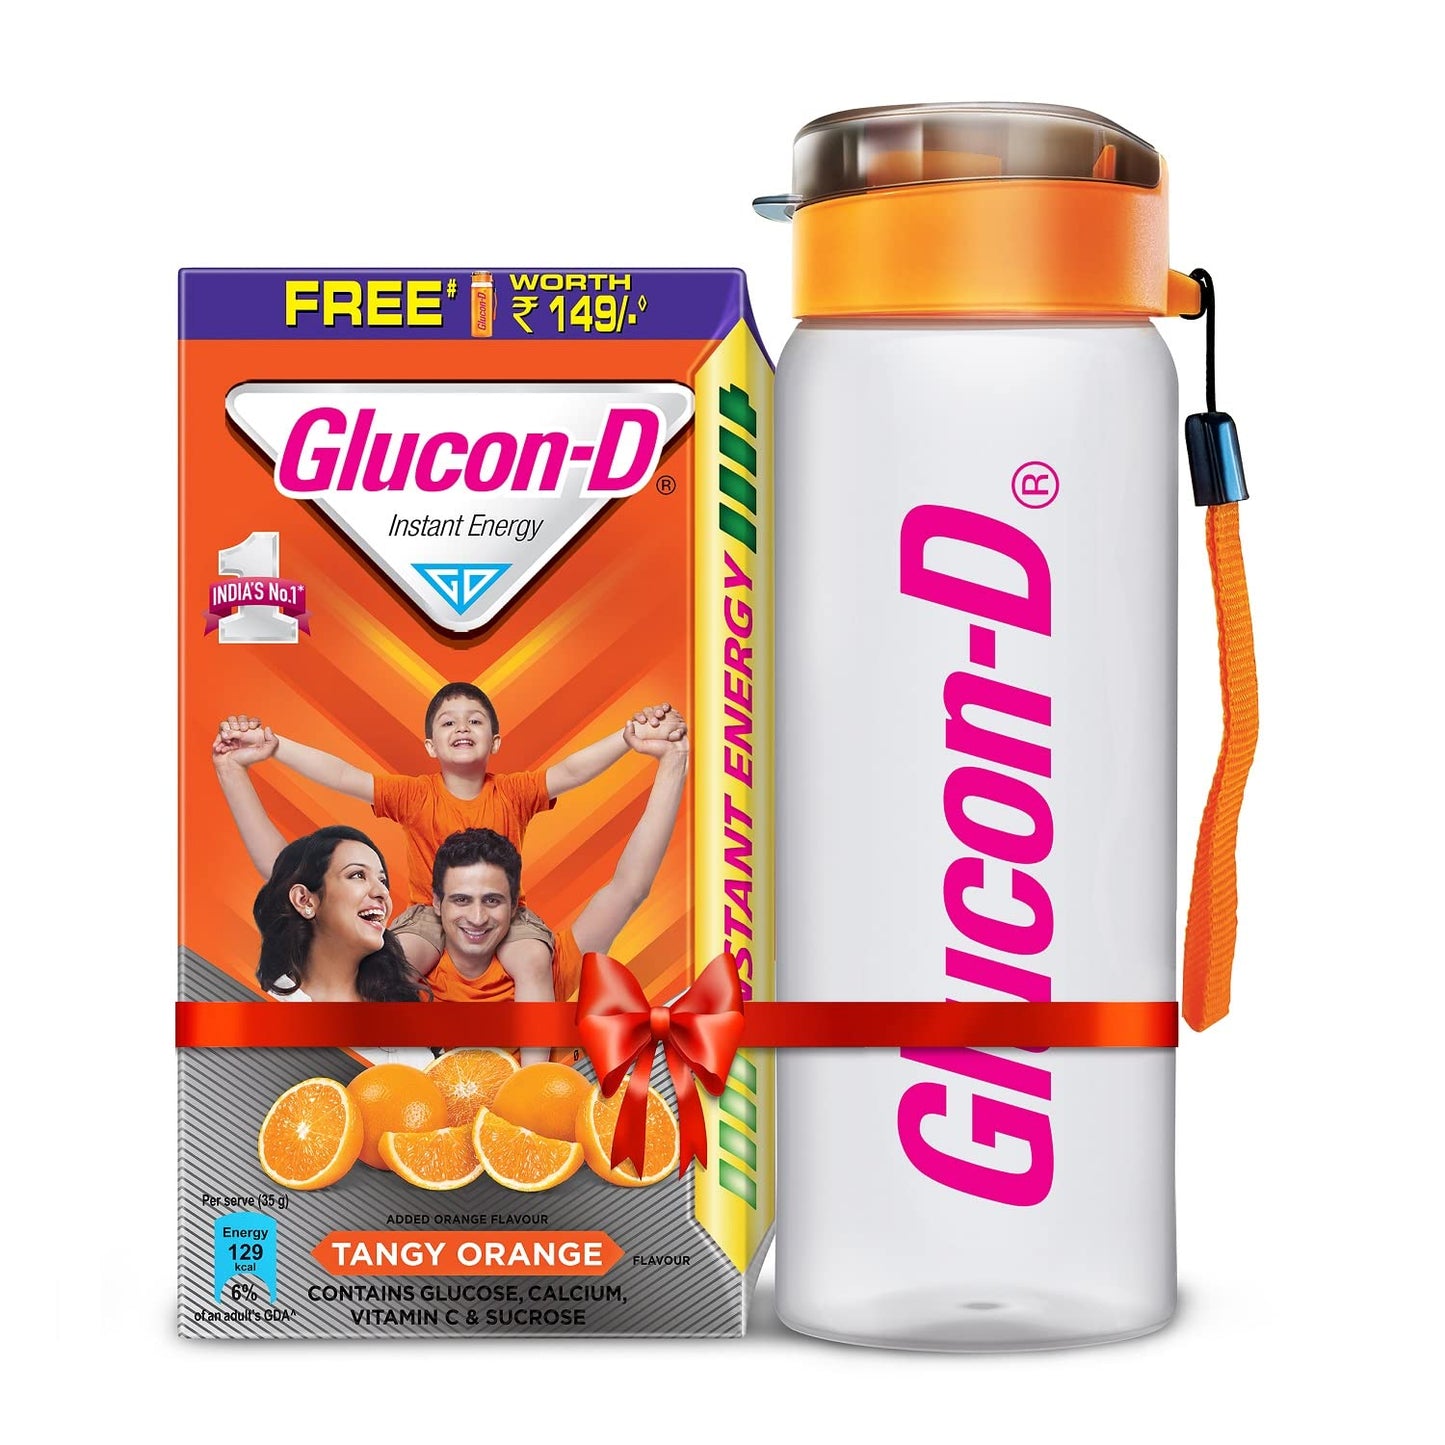 Glucon-D Instant Energy Health Drink Tangy Orange - 1kg Refill with free bottle, Glucon-D